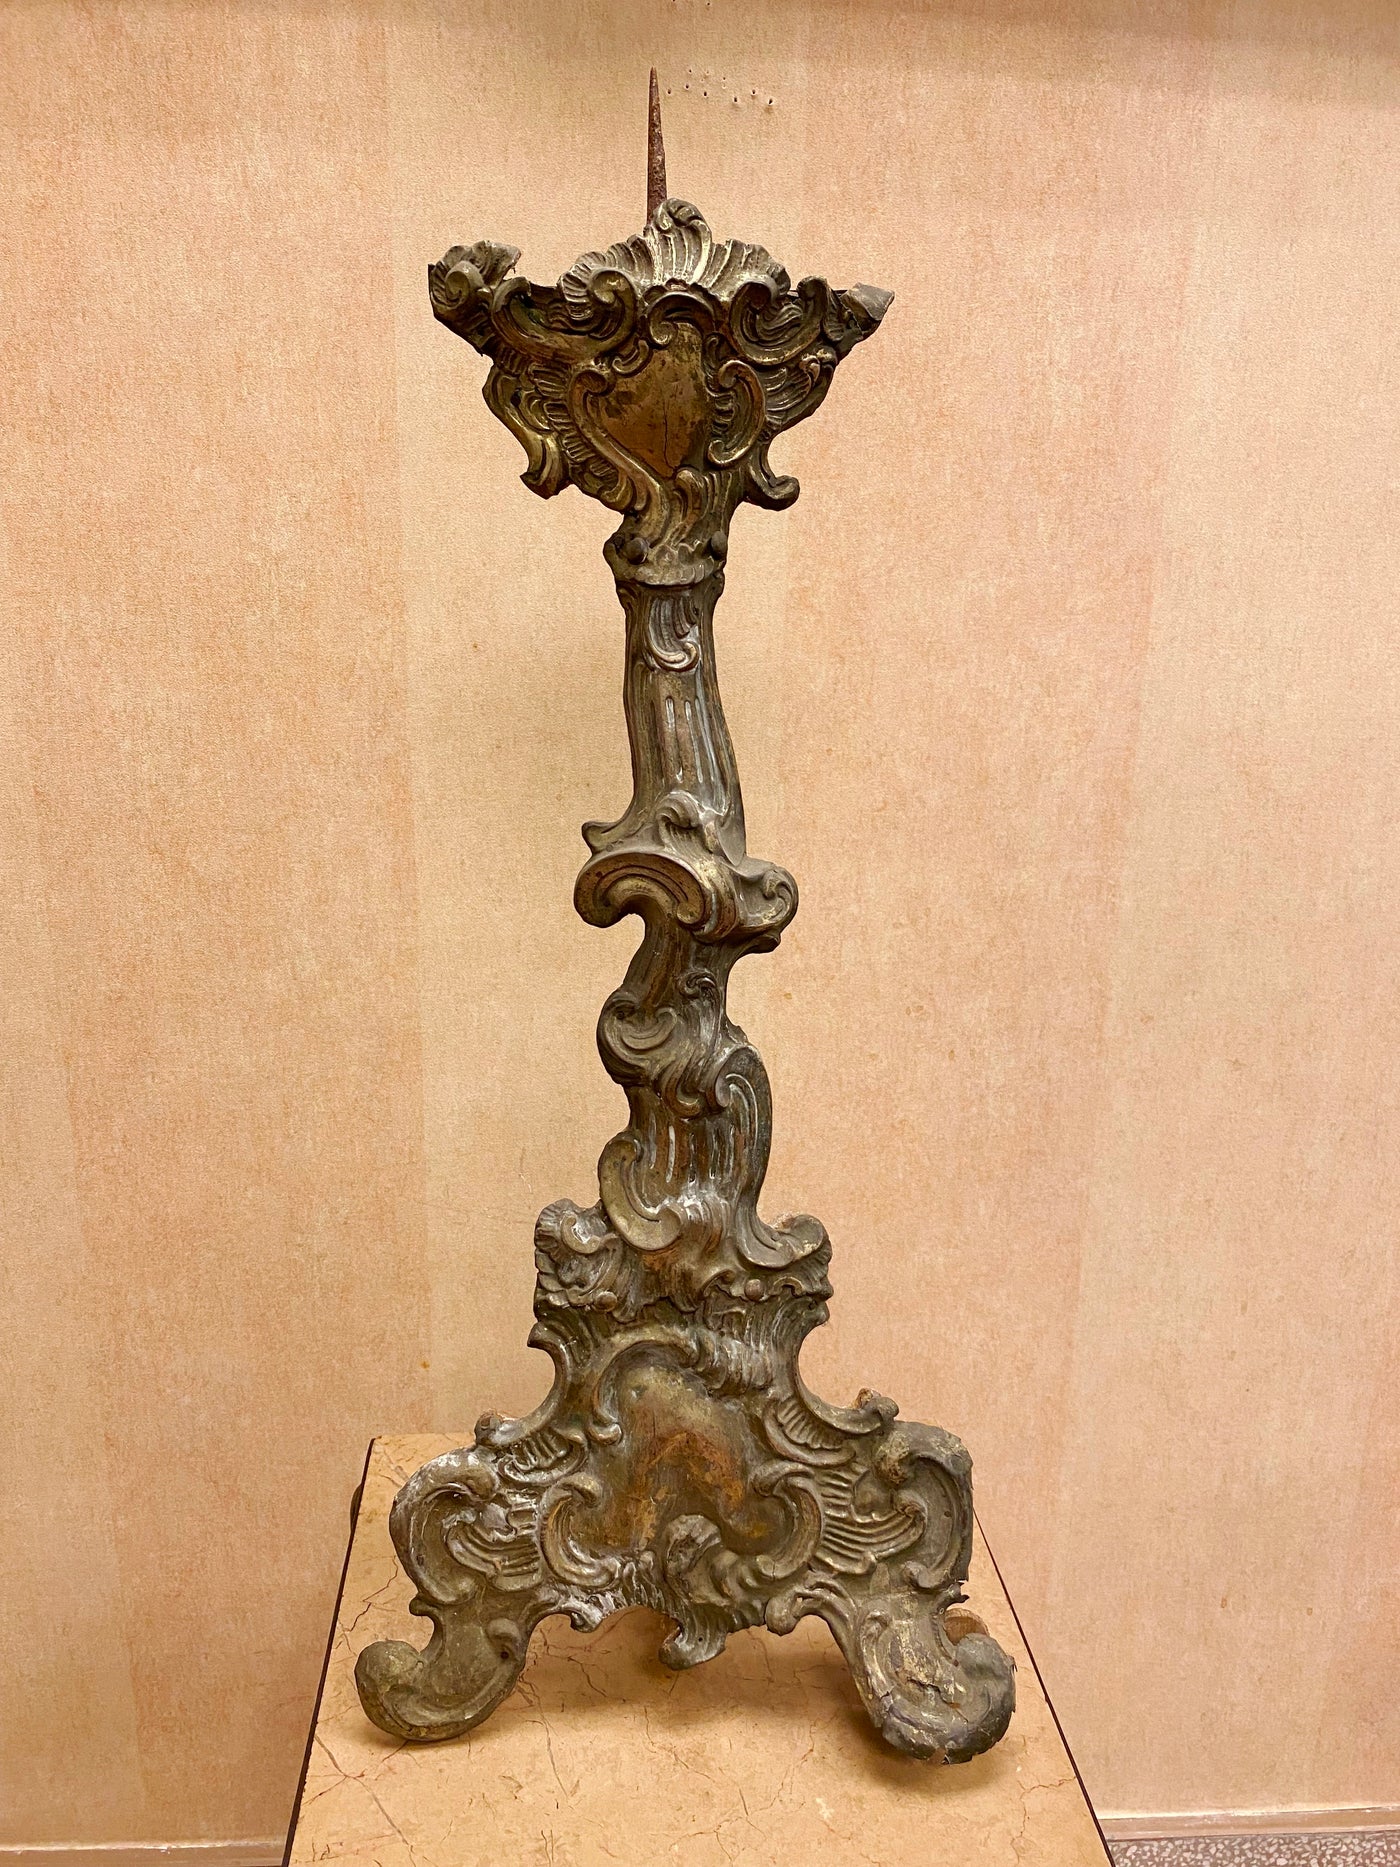 Pair of Altar Candlesticks, Italy, early 18th century, Bronze